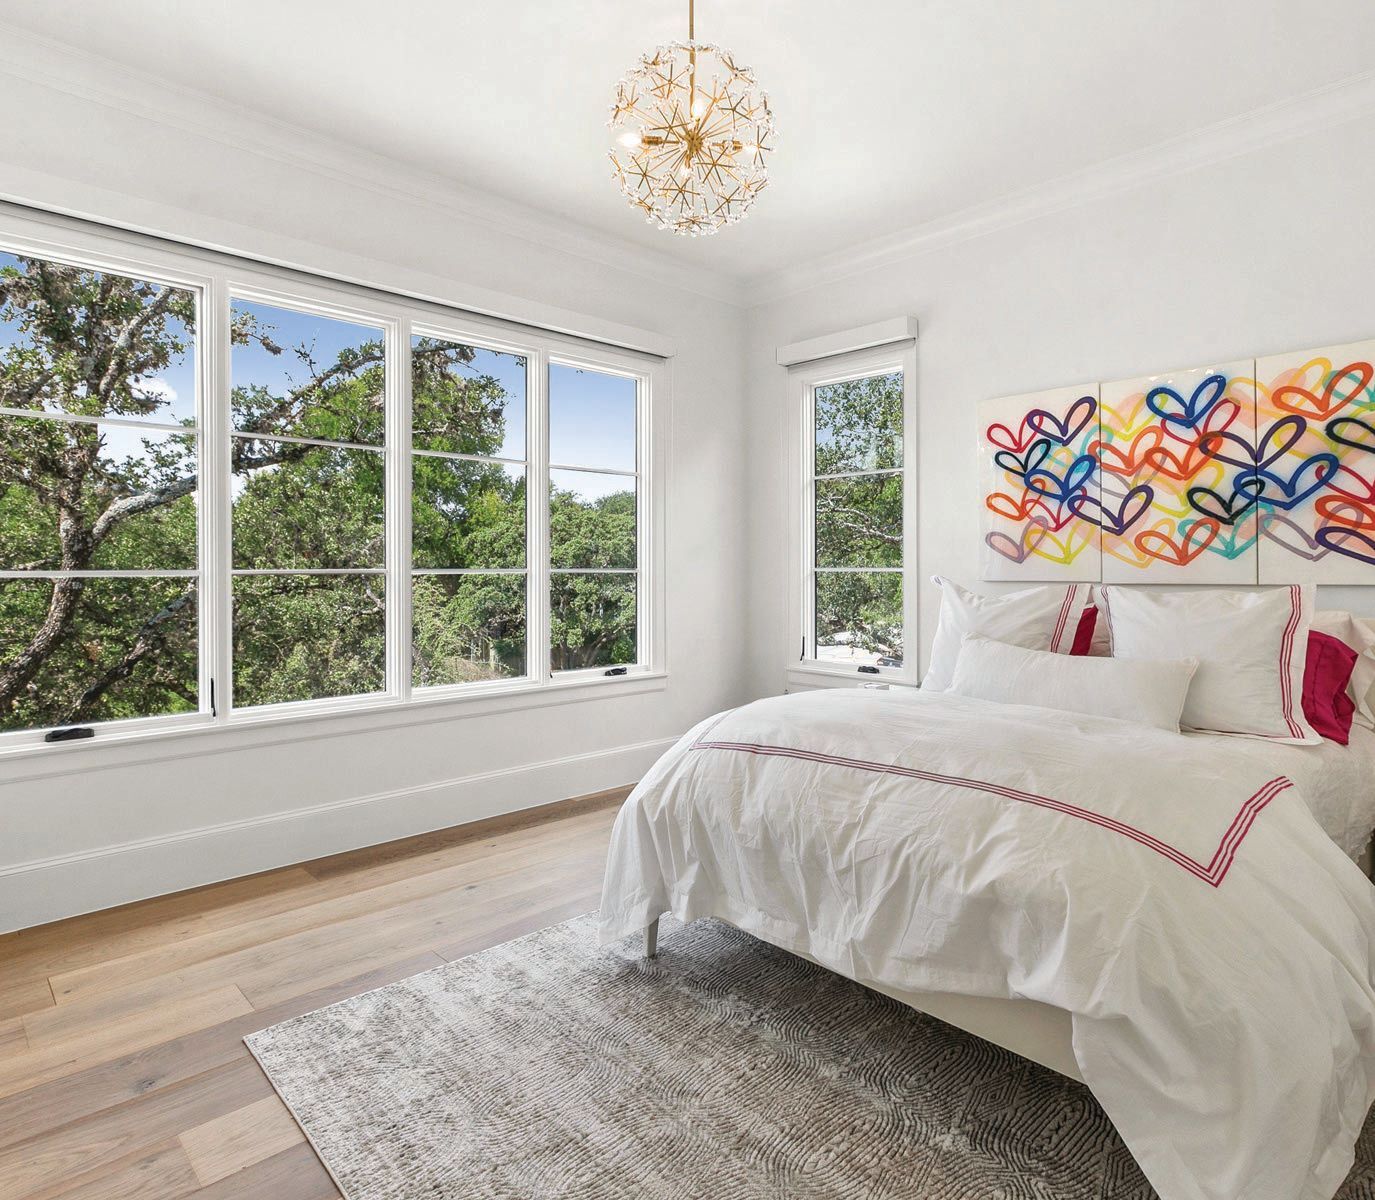 Each bedroom boasts its own personal charm PHOTOGRAPHY BY JPM REAL ESTATE PHOTOGRAPHY